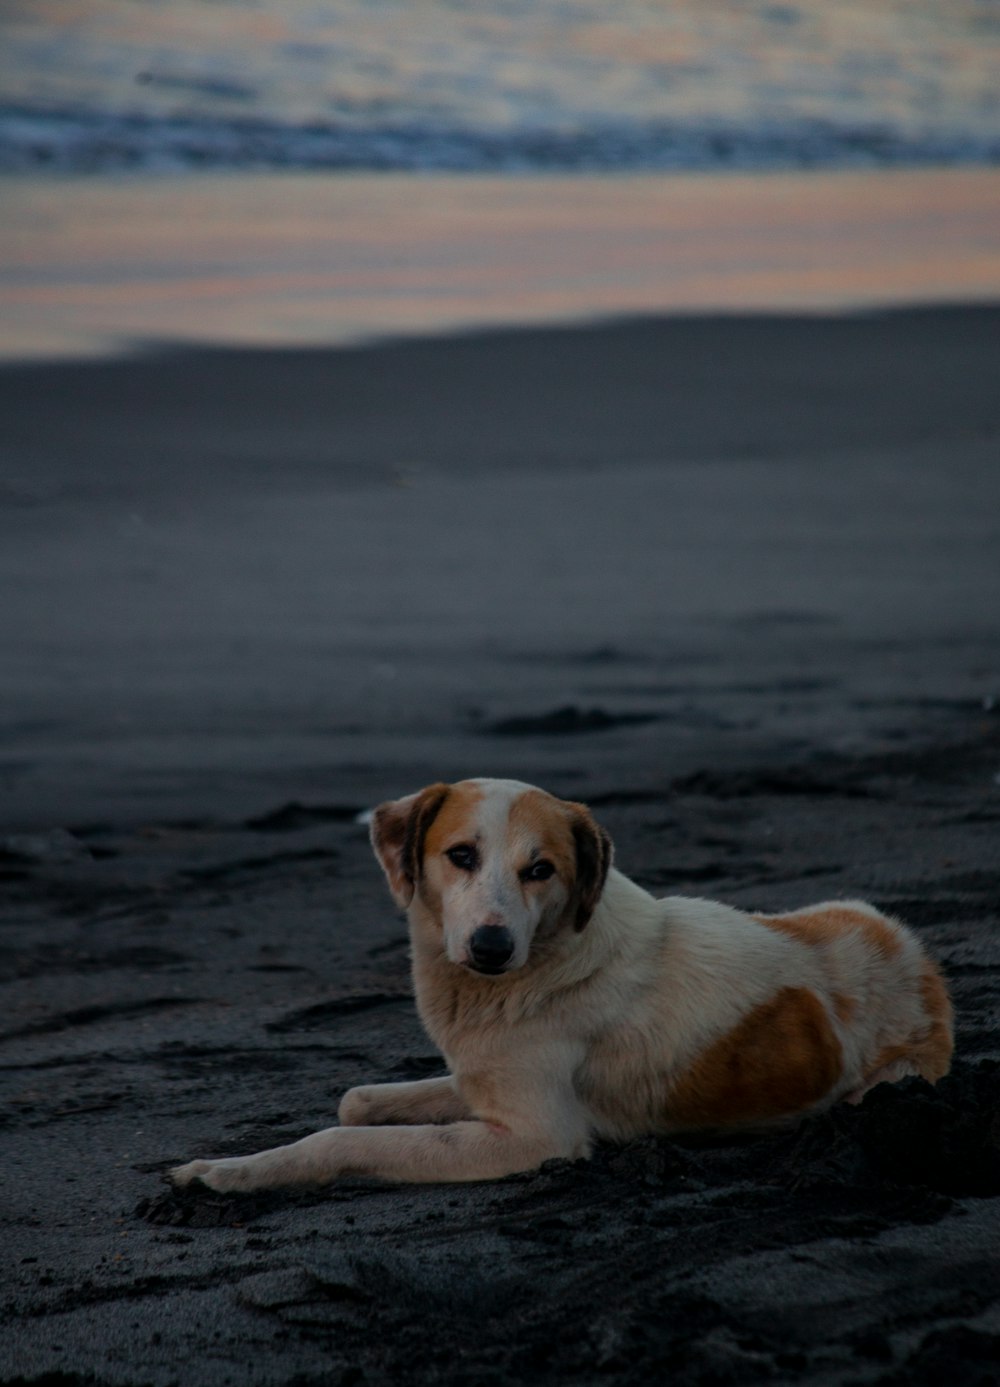 brown and white short coated dog lying on the beach during daytime